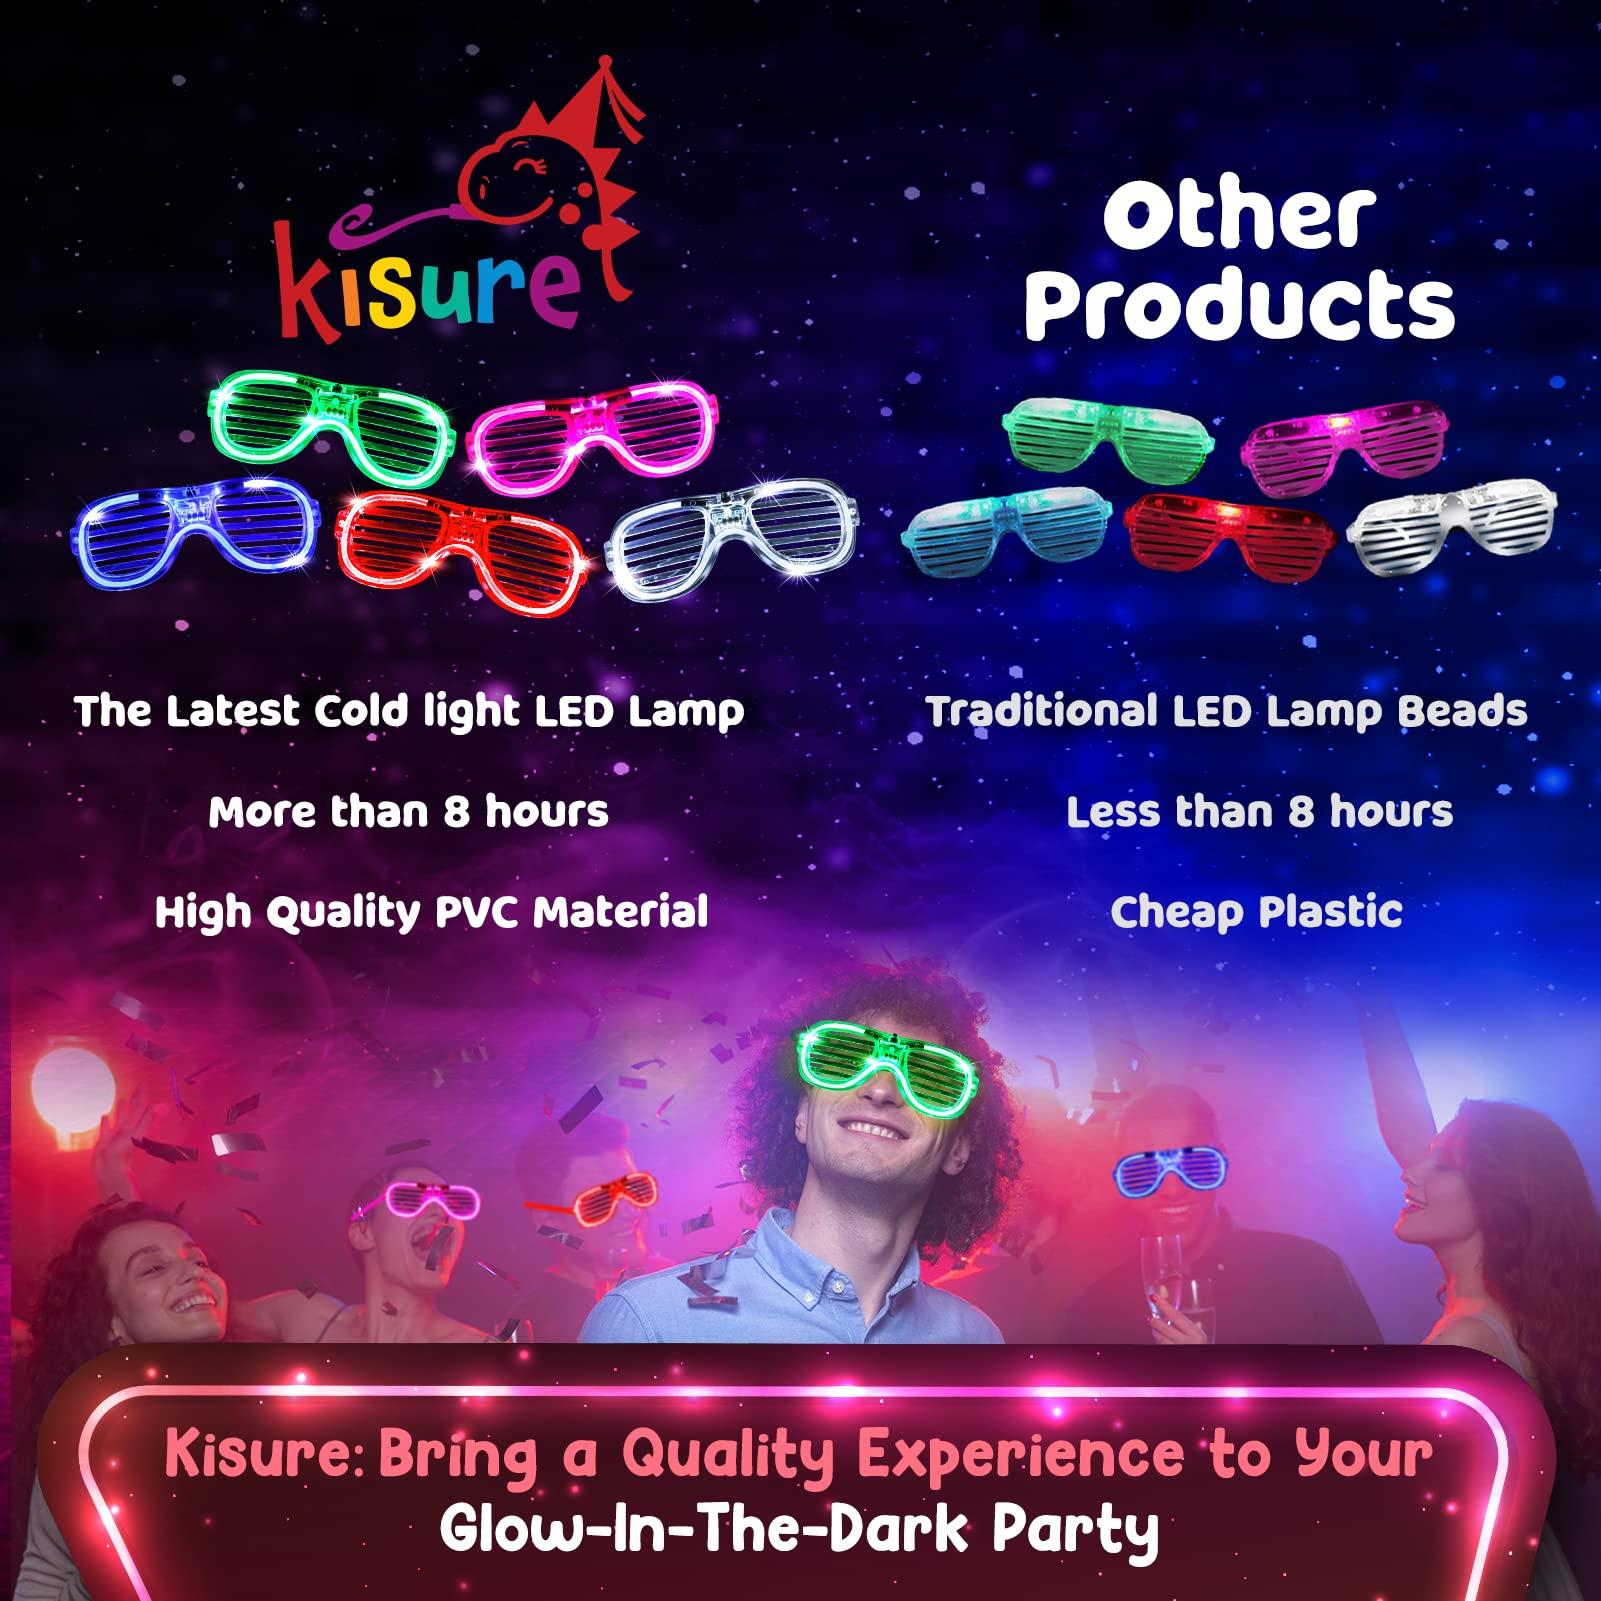 Kisure 48PCS Glow in the Dark Party Supplies, Wedding Light Up Party Favors - 24pcs 16" Foam Glow Sticks, 12pcs LED Glasses and Bunny Ear Headband for Halloween Concert Carnival Birthday Neon Party